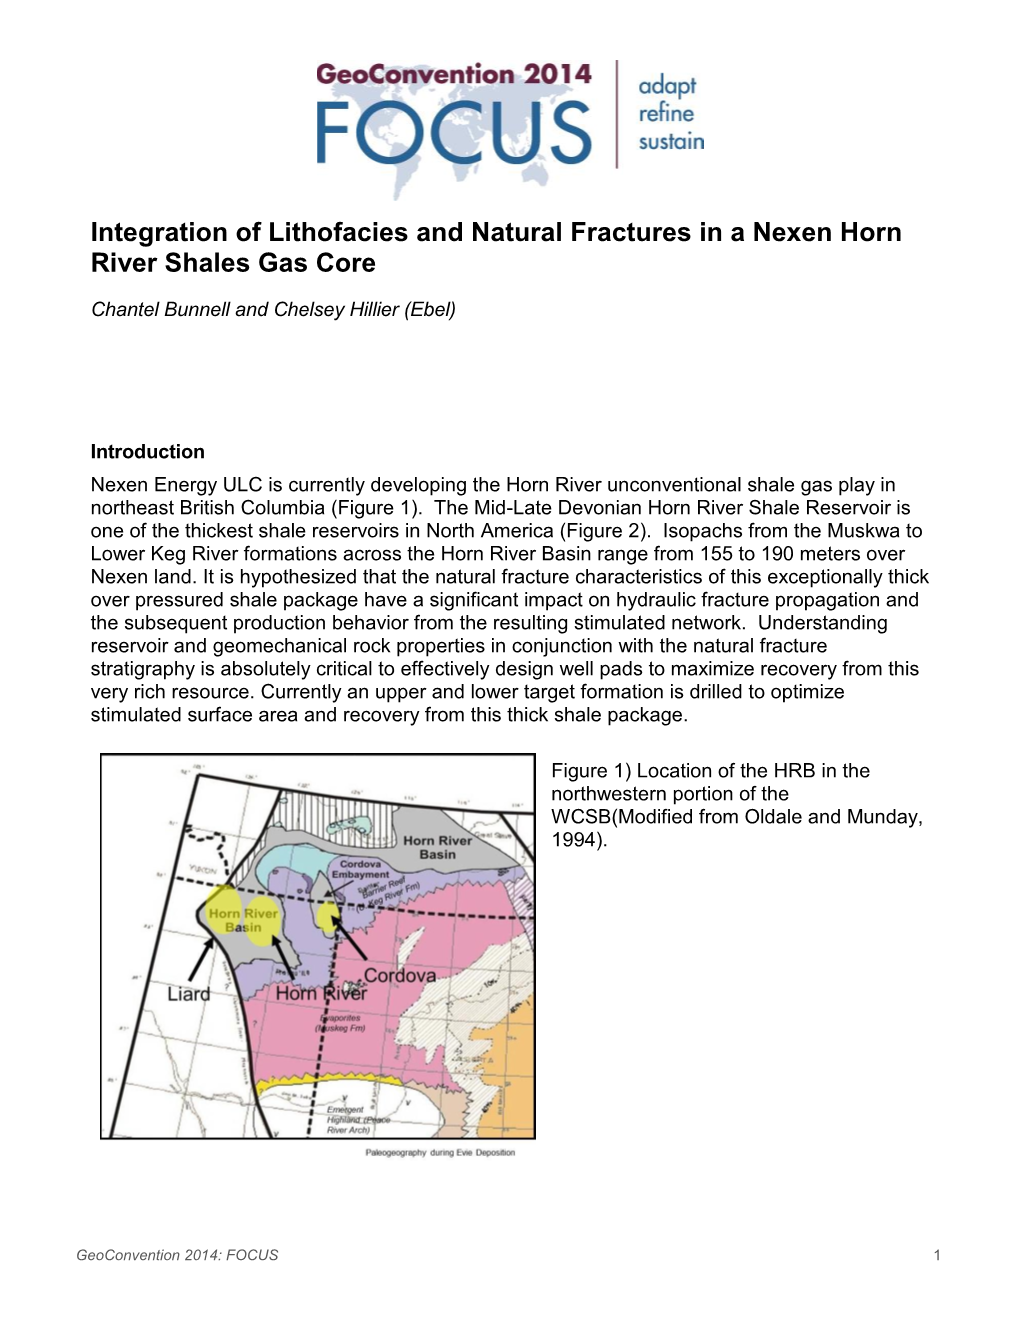 Integration of Lithofacies and Natural Fractures in a Nexen Horn River Shales Gas Core